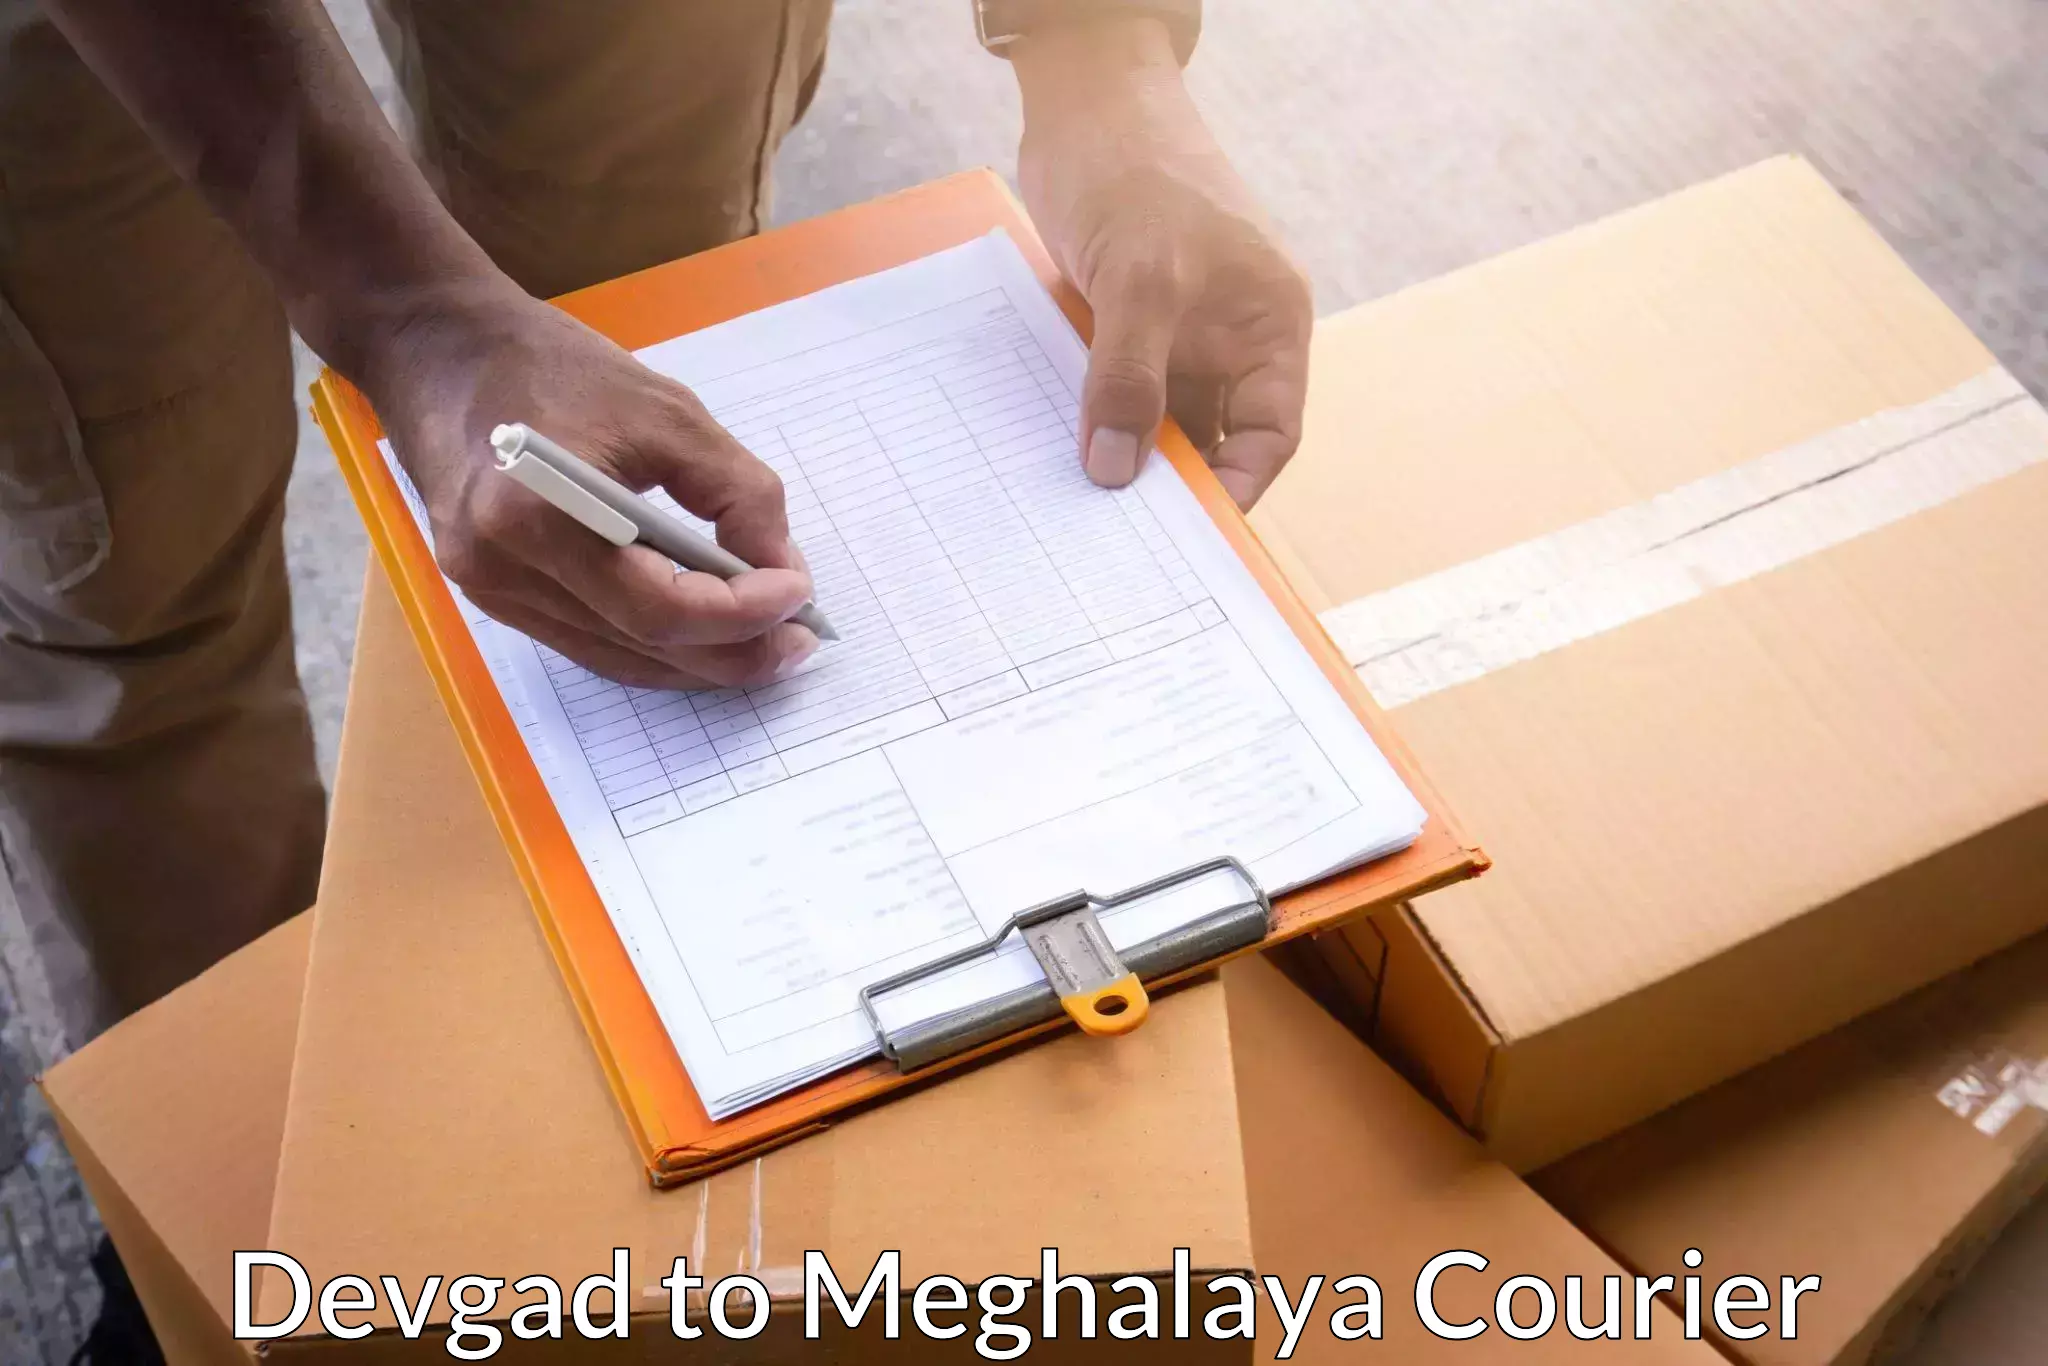 State-of-the-art courier technology in Devgad to Meghalaya